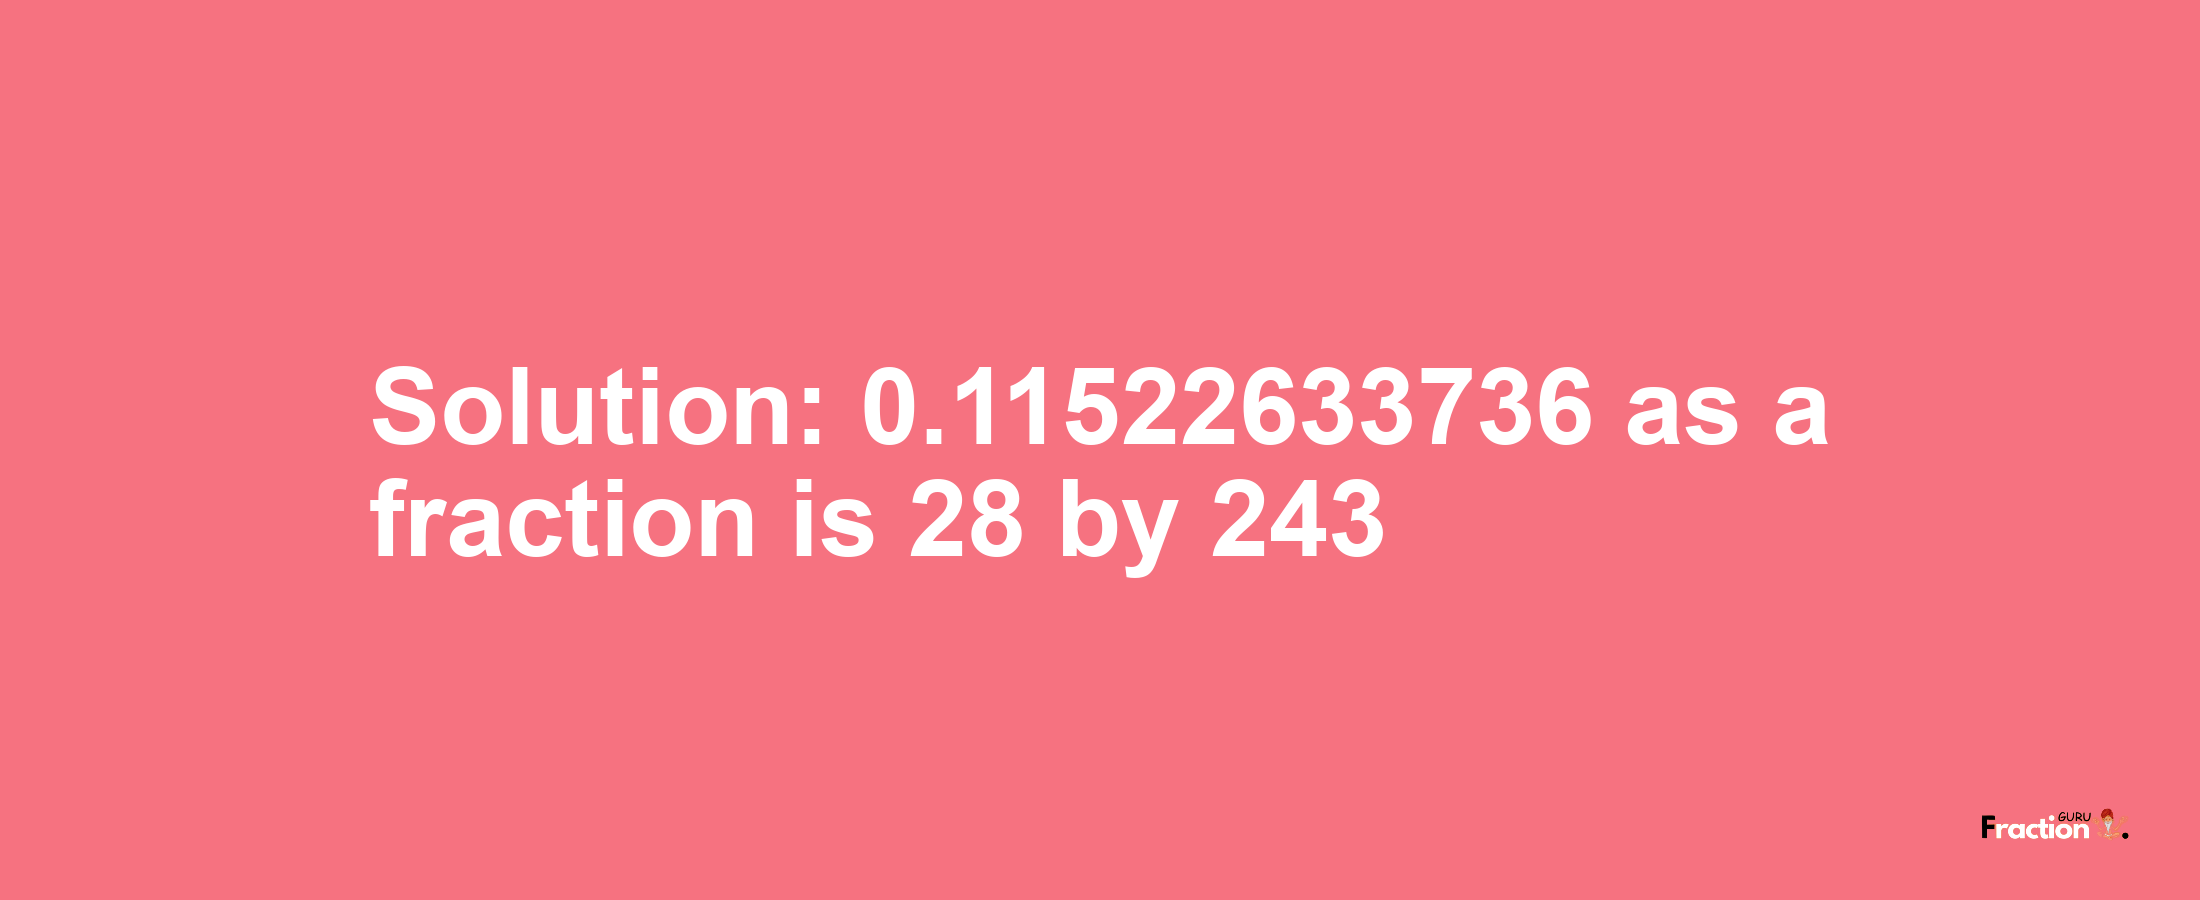 Solution:0.11522633736 as a fraction is 28/243